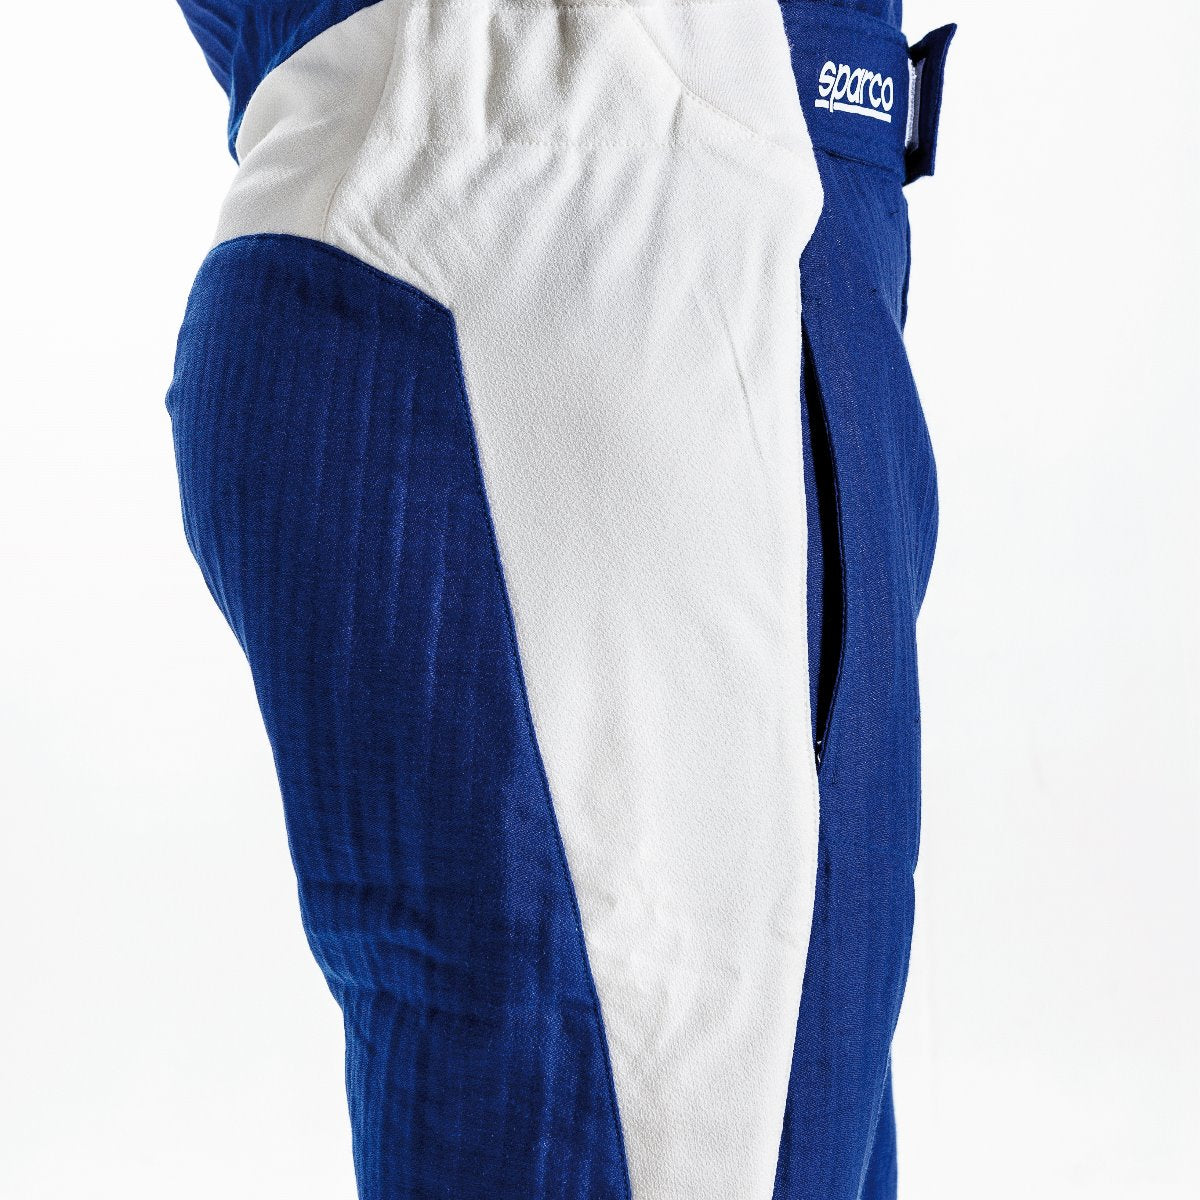 Sparco Eagle 2.0 Blue / white Race Suit Clearance sale lowest price for the best dealImage